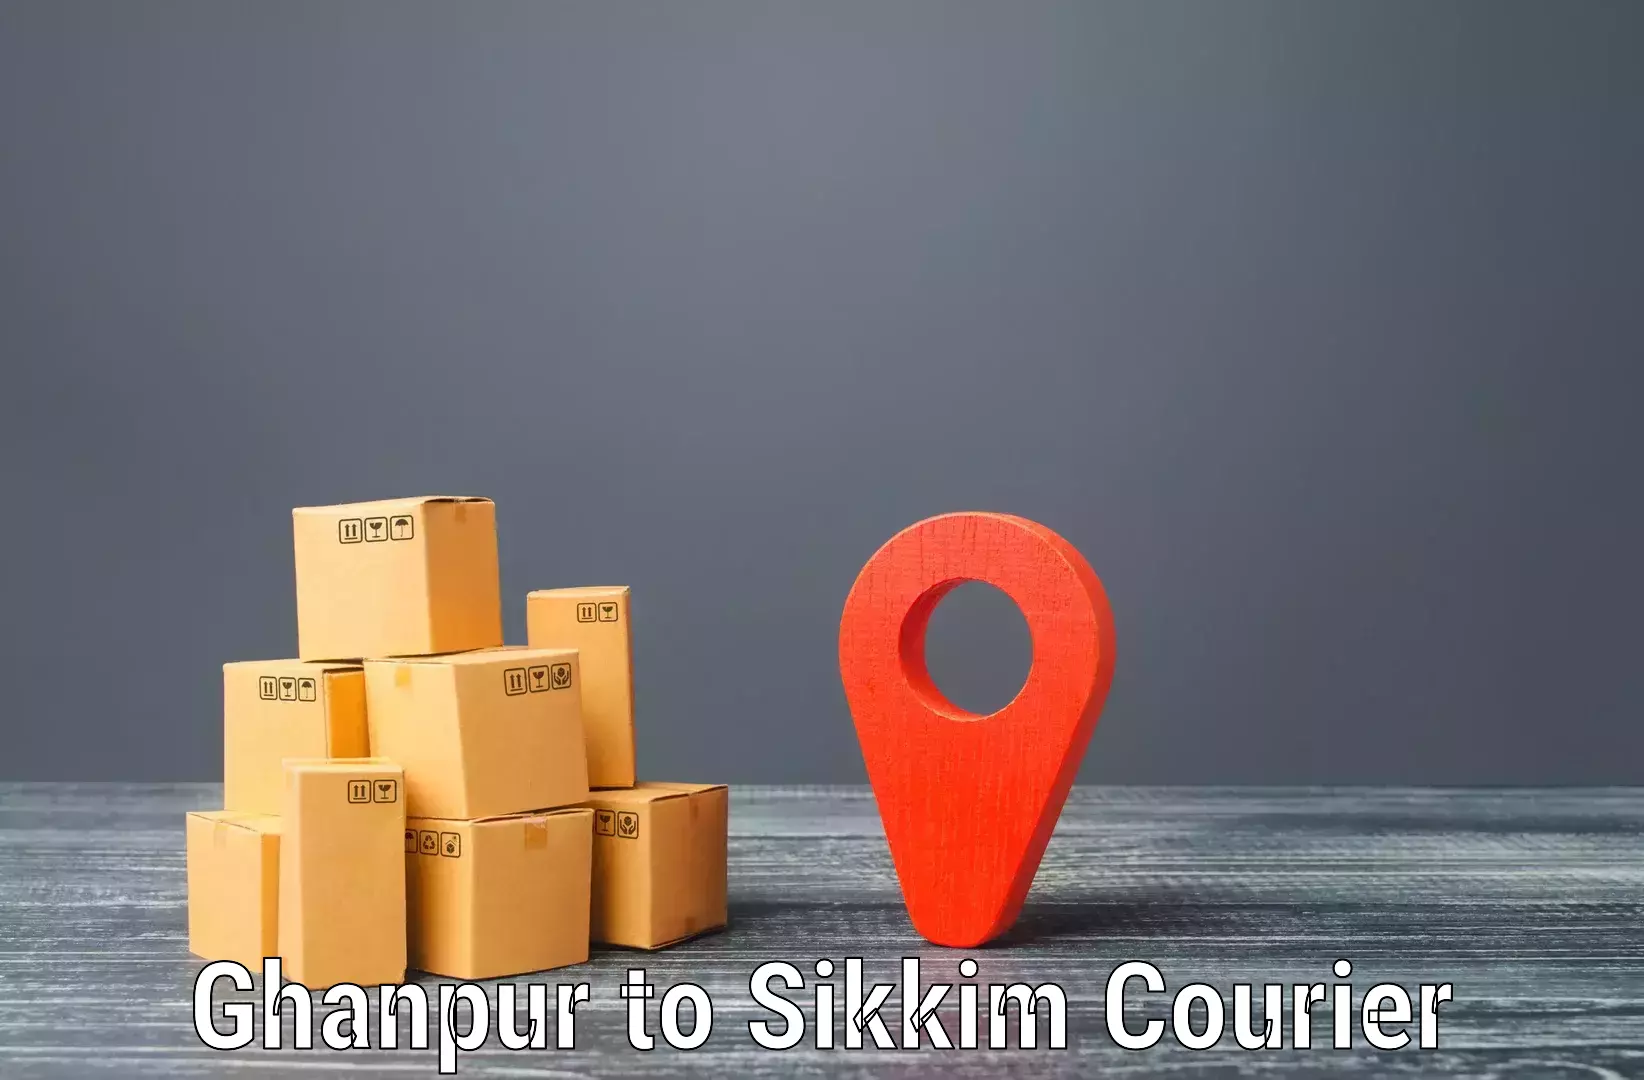 Quality courier partnerships in Ghanpur to Pelling